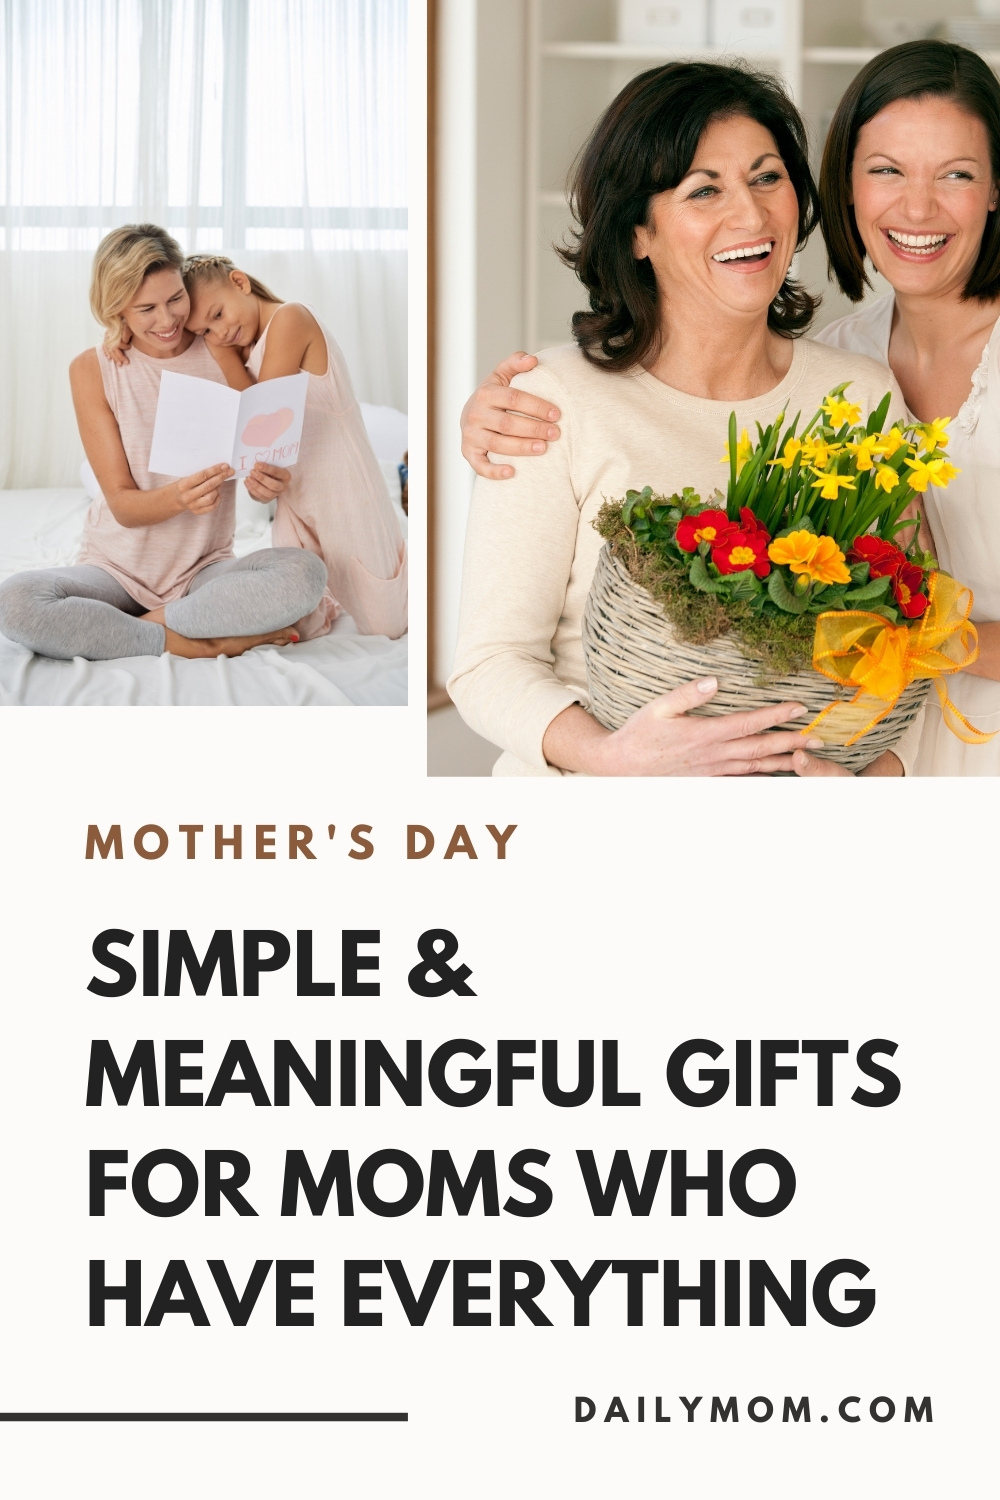 25 Simple & Meaningful Gifts For Moms Who Have Everything